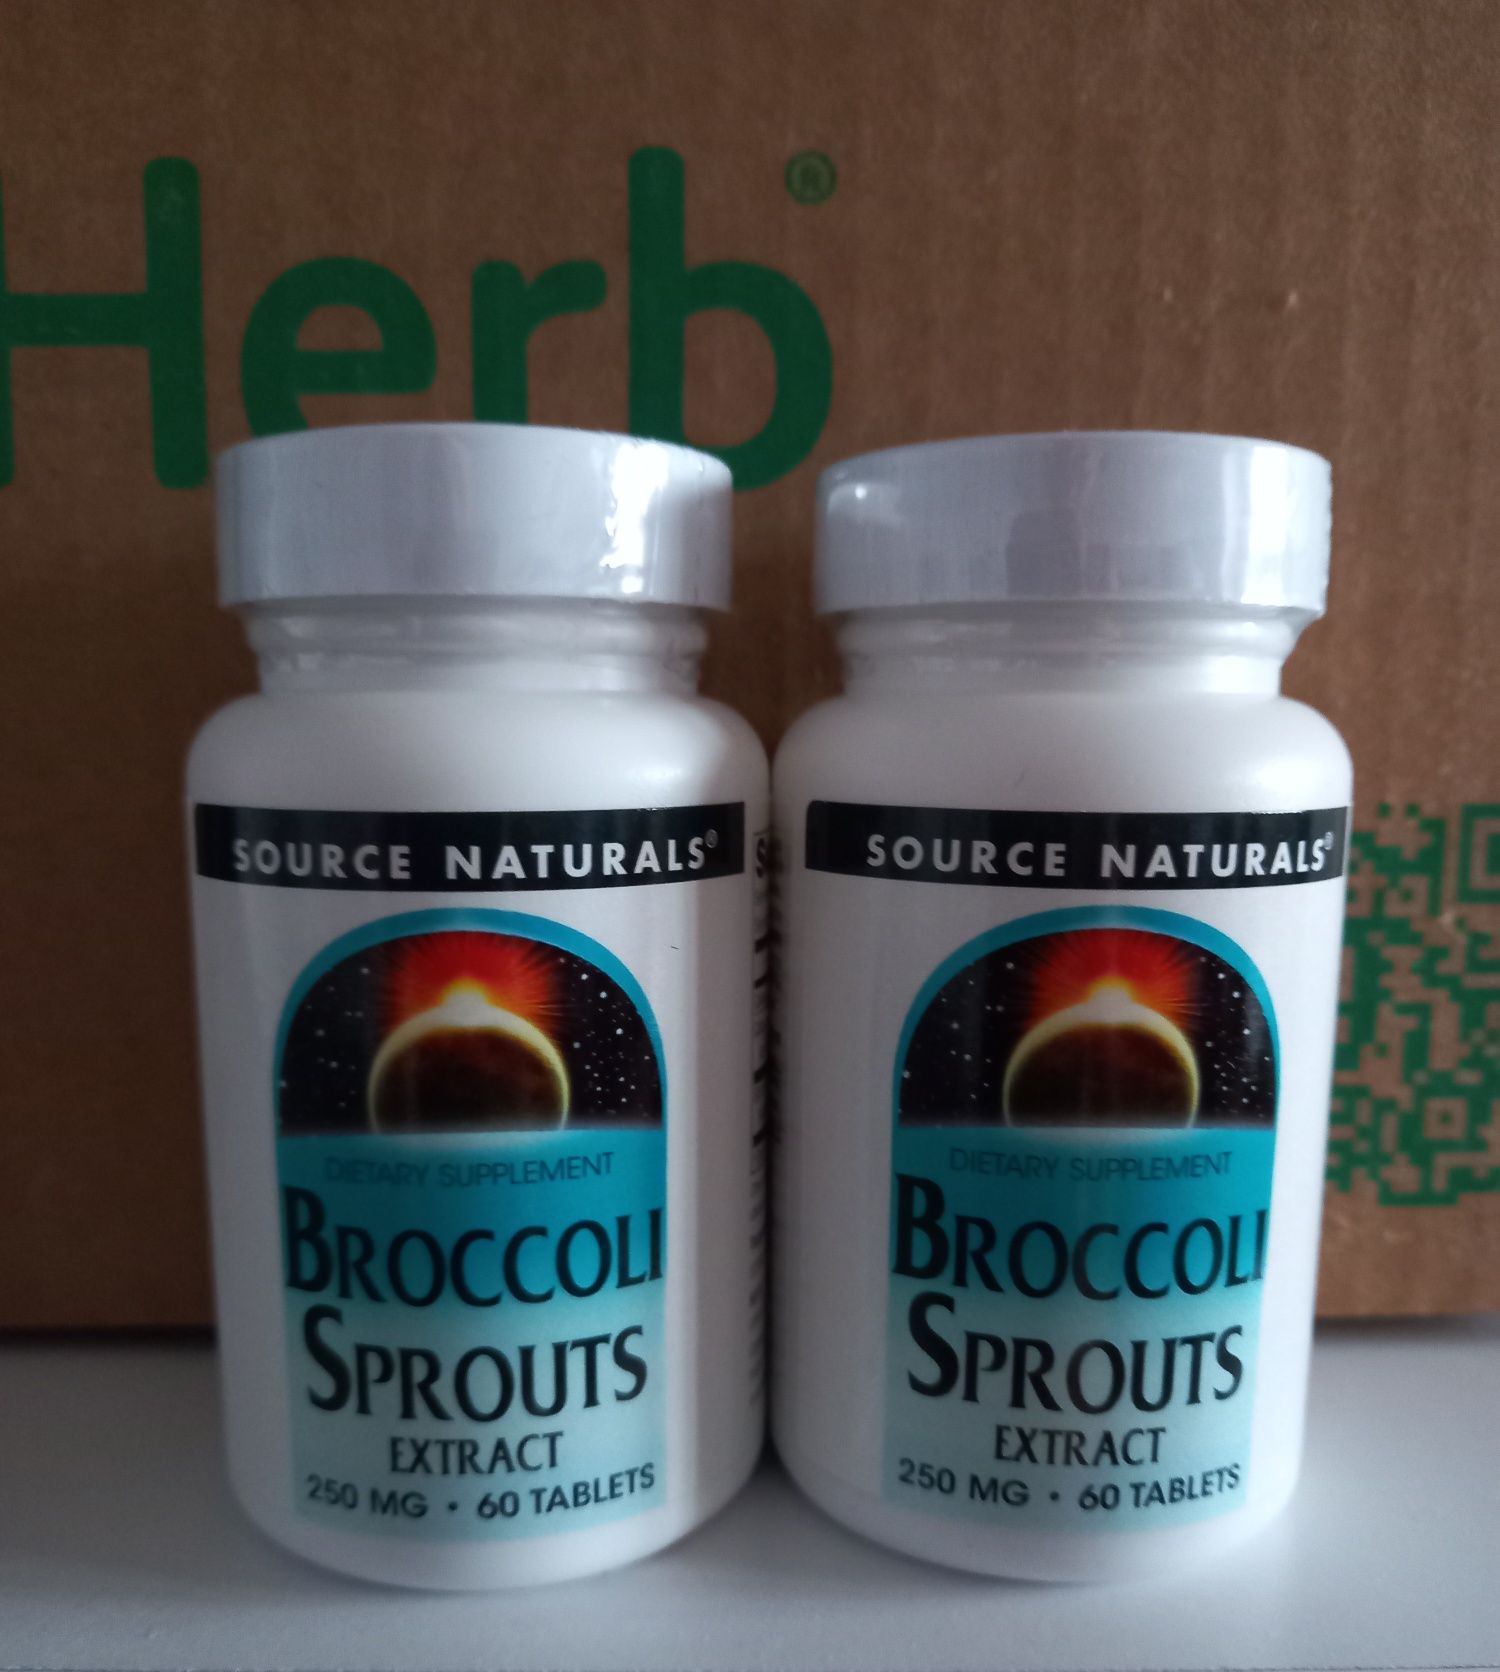 Iherb Source Naturals broccoli sprouts extract екстракт броколі 60шт.